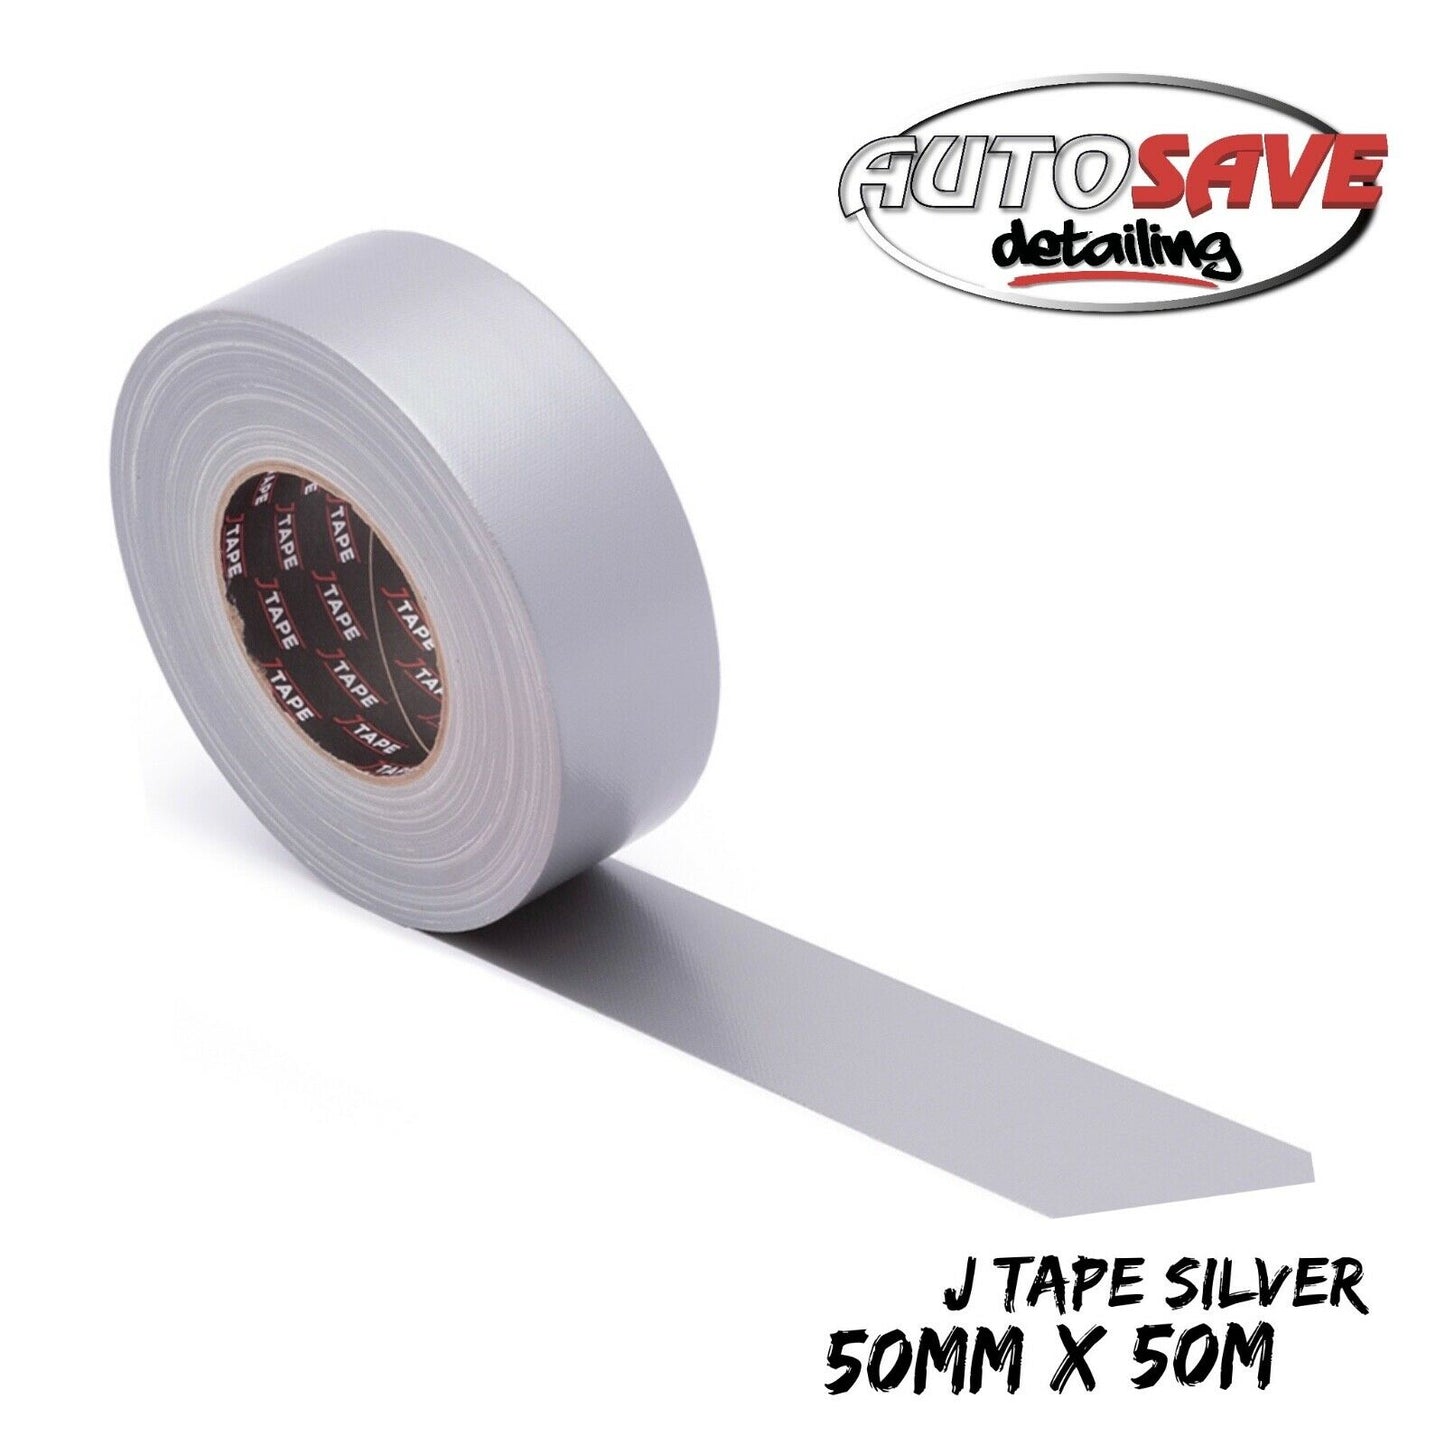 J Tape Silver Polythene Adhesive Cloth Tape (Duct Tape) 50mm x 50m